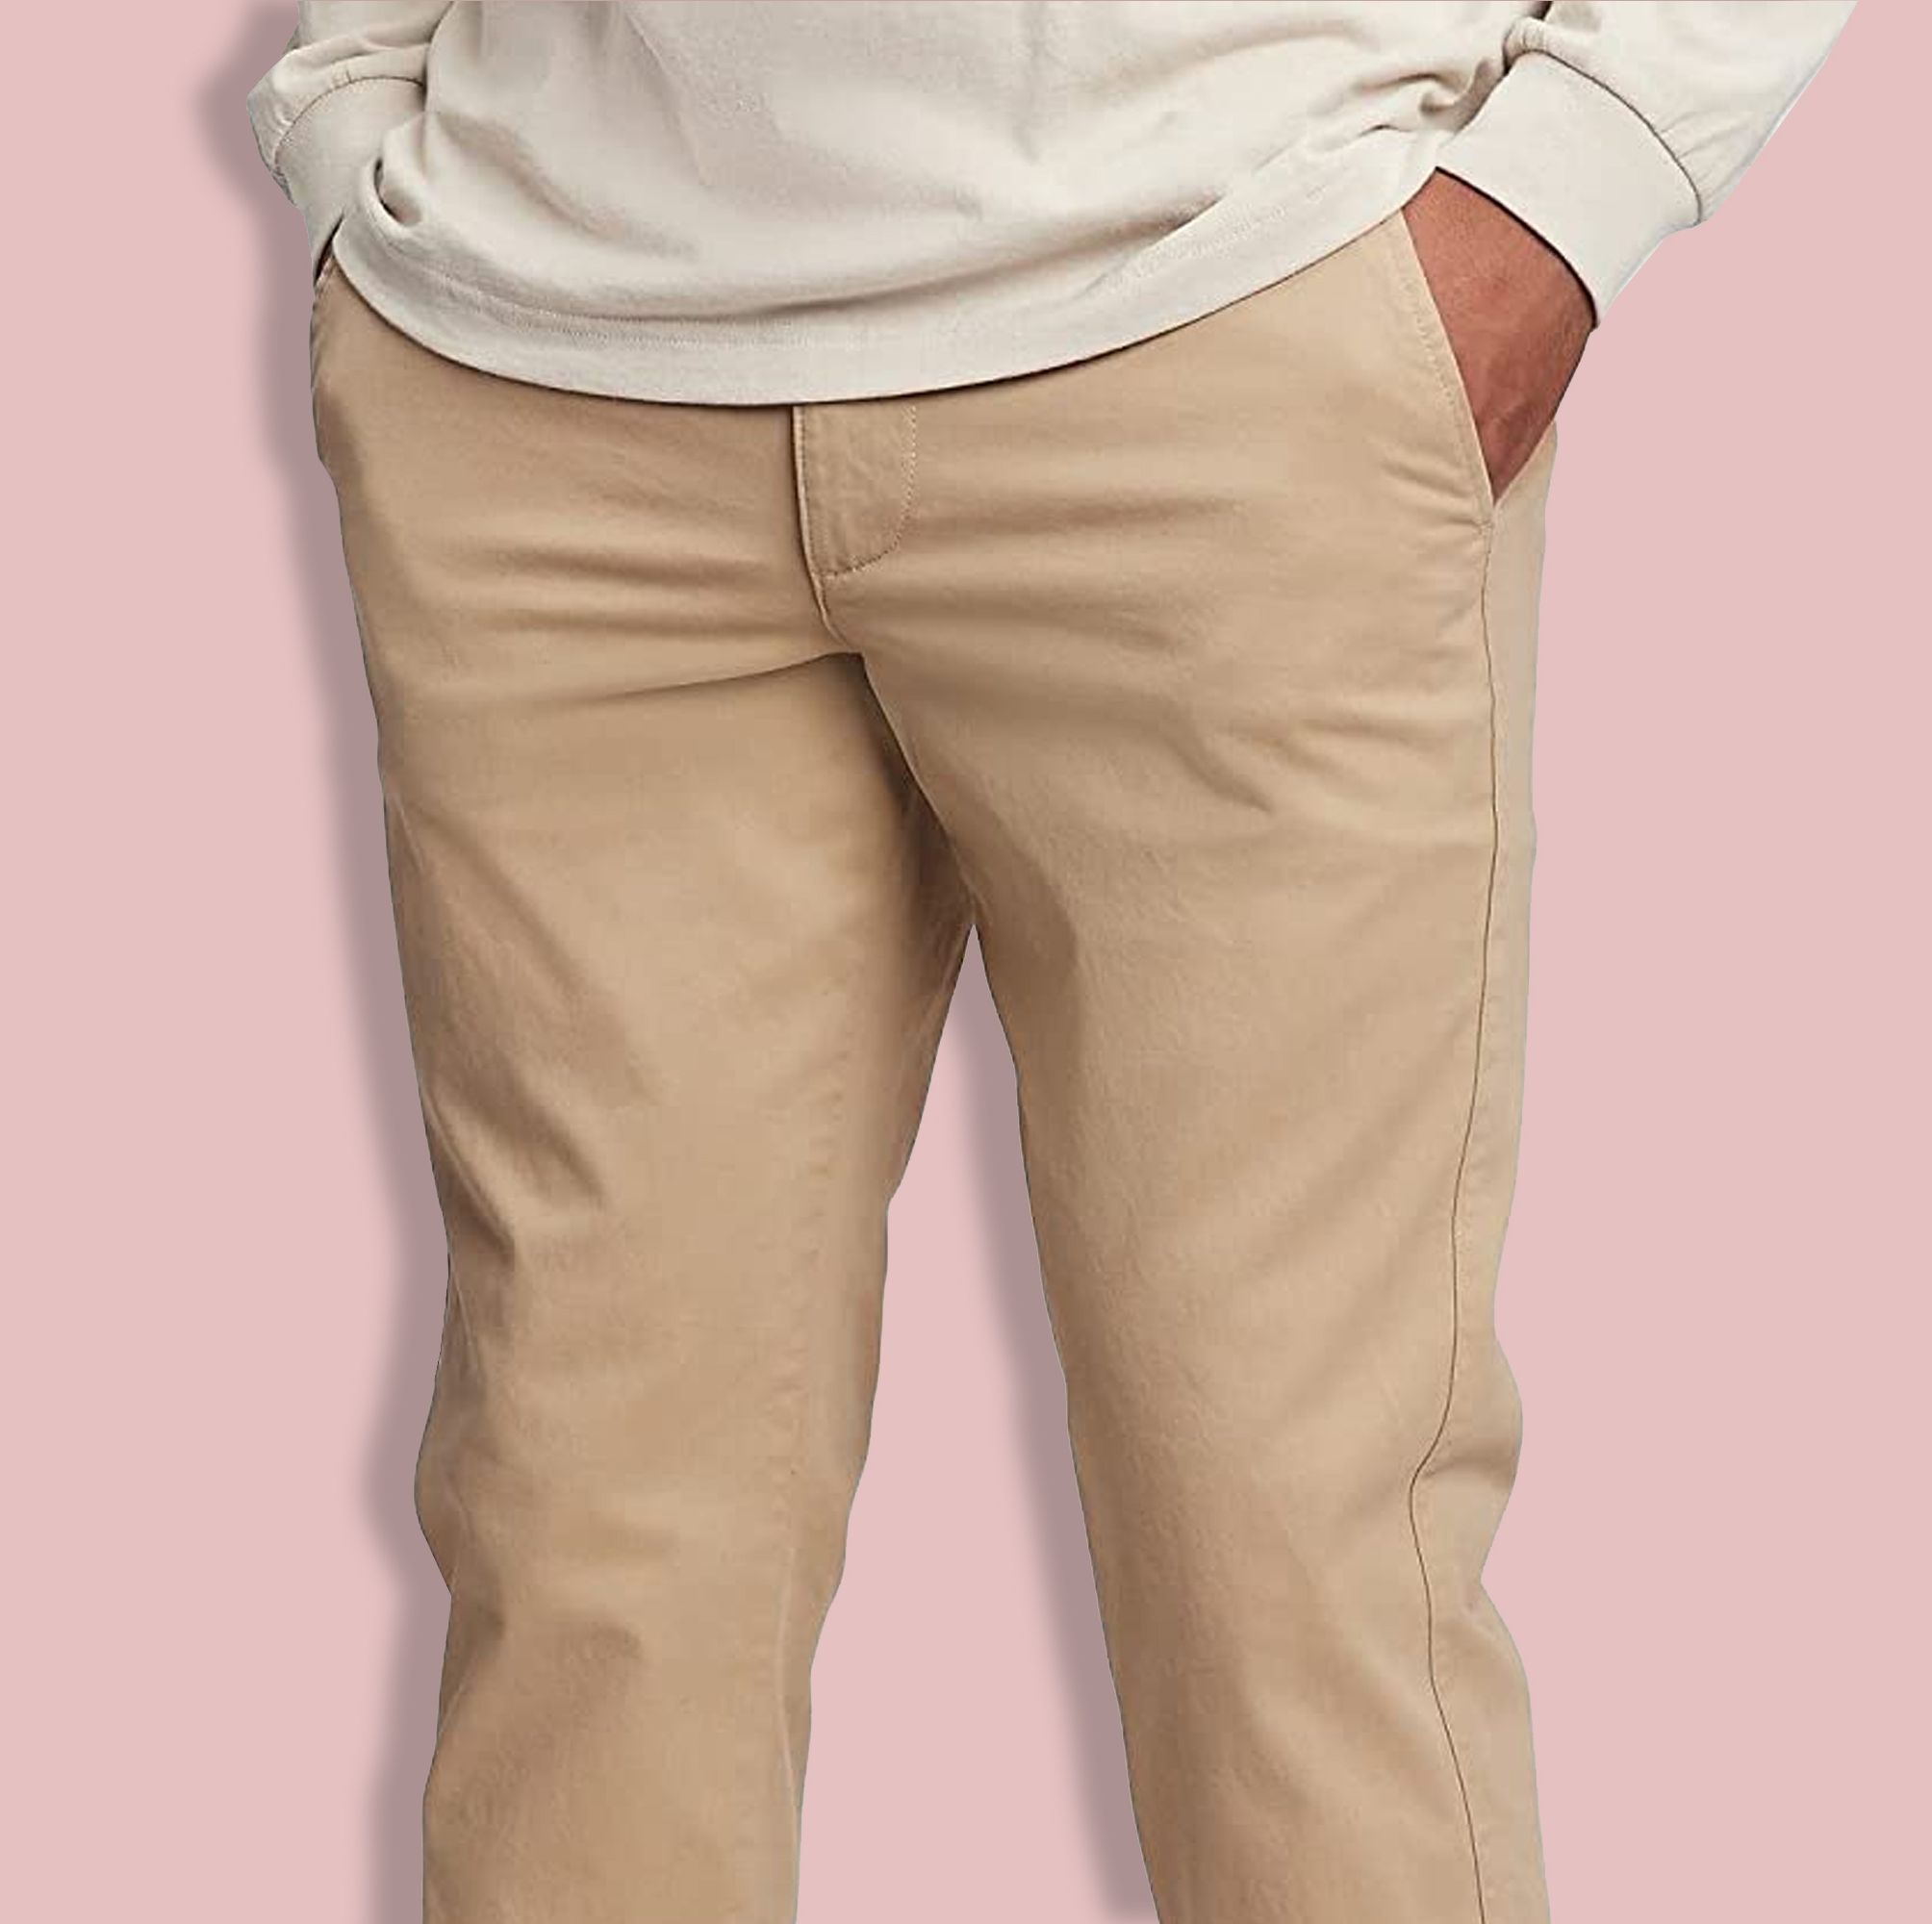 20 Great Pairs of Khaki Pants—All For Less Than $100